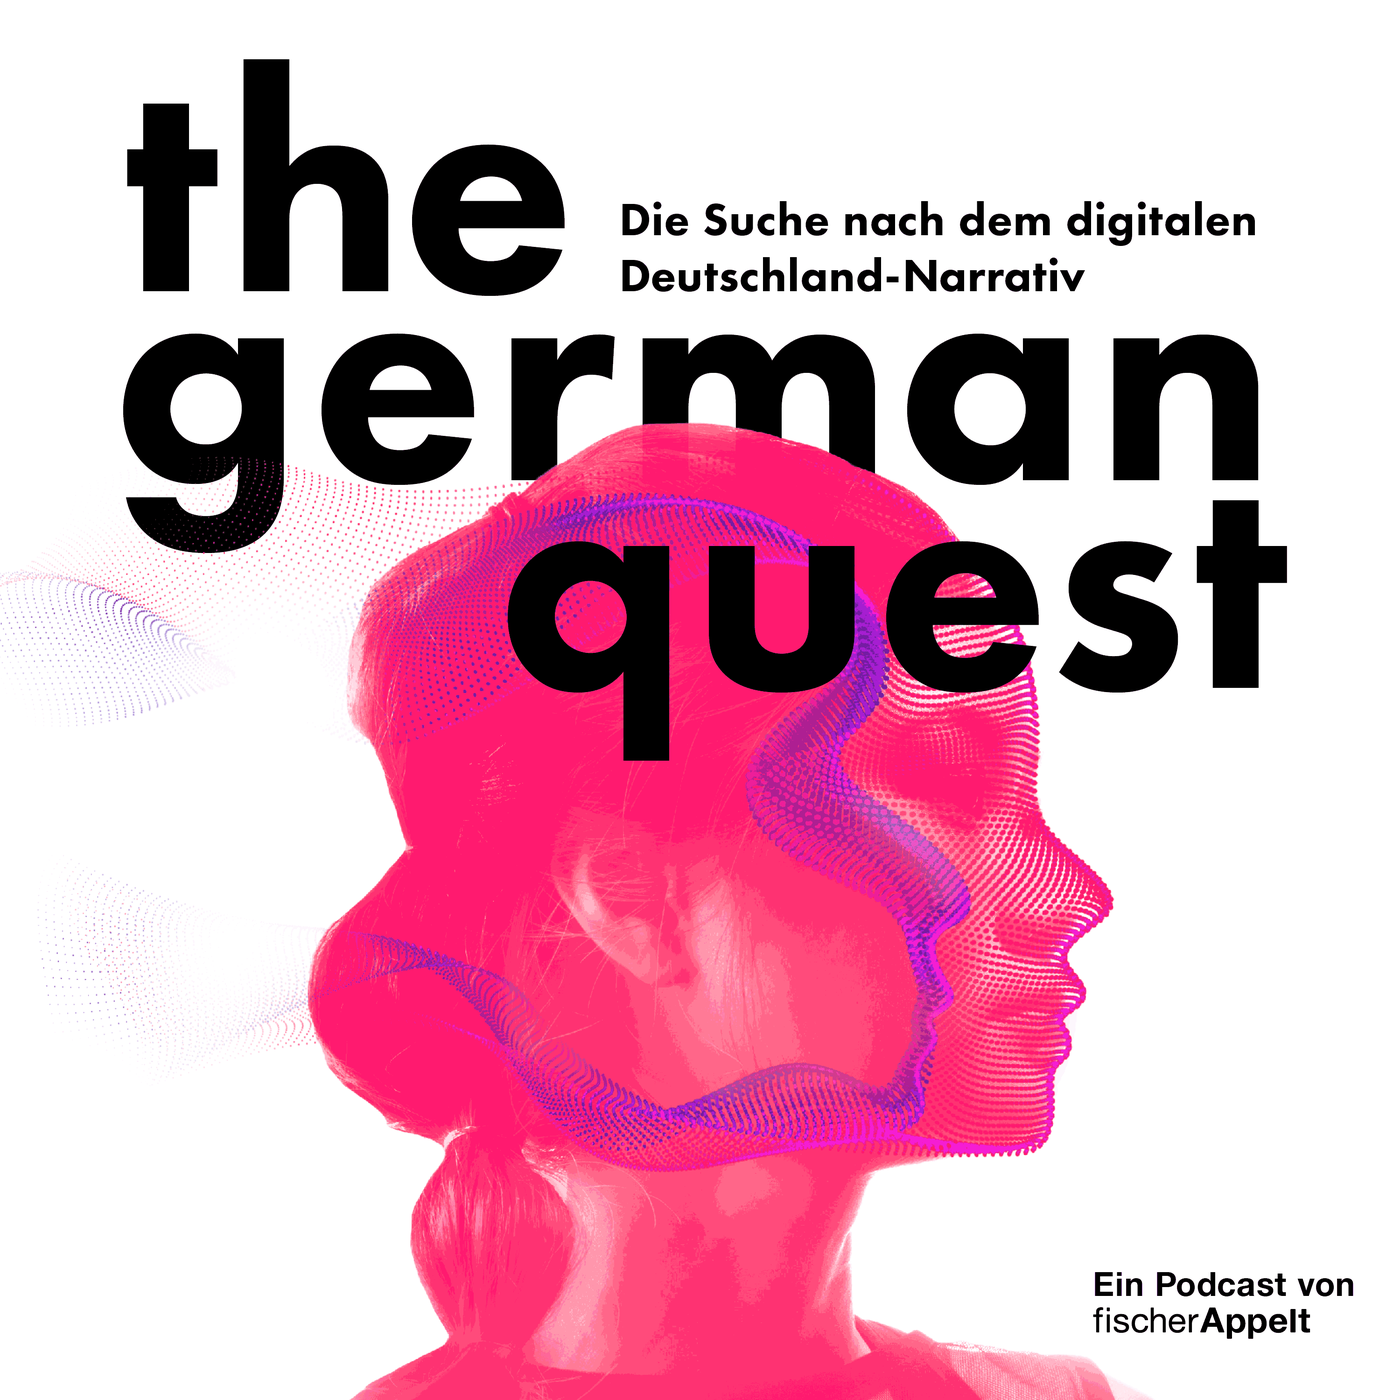 the german quest